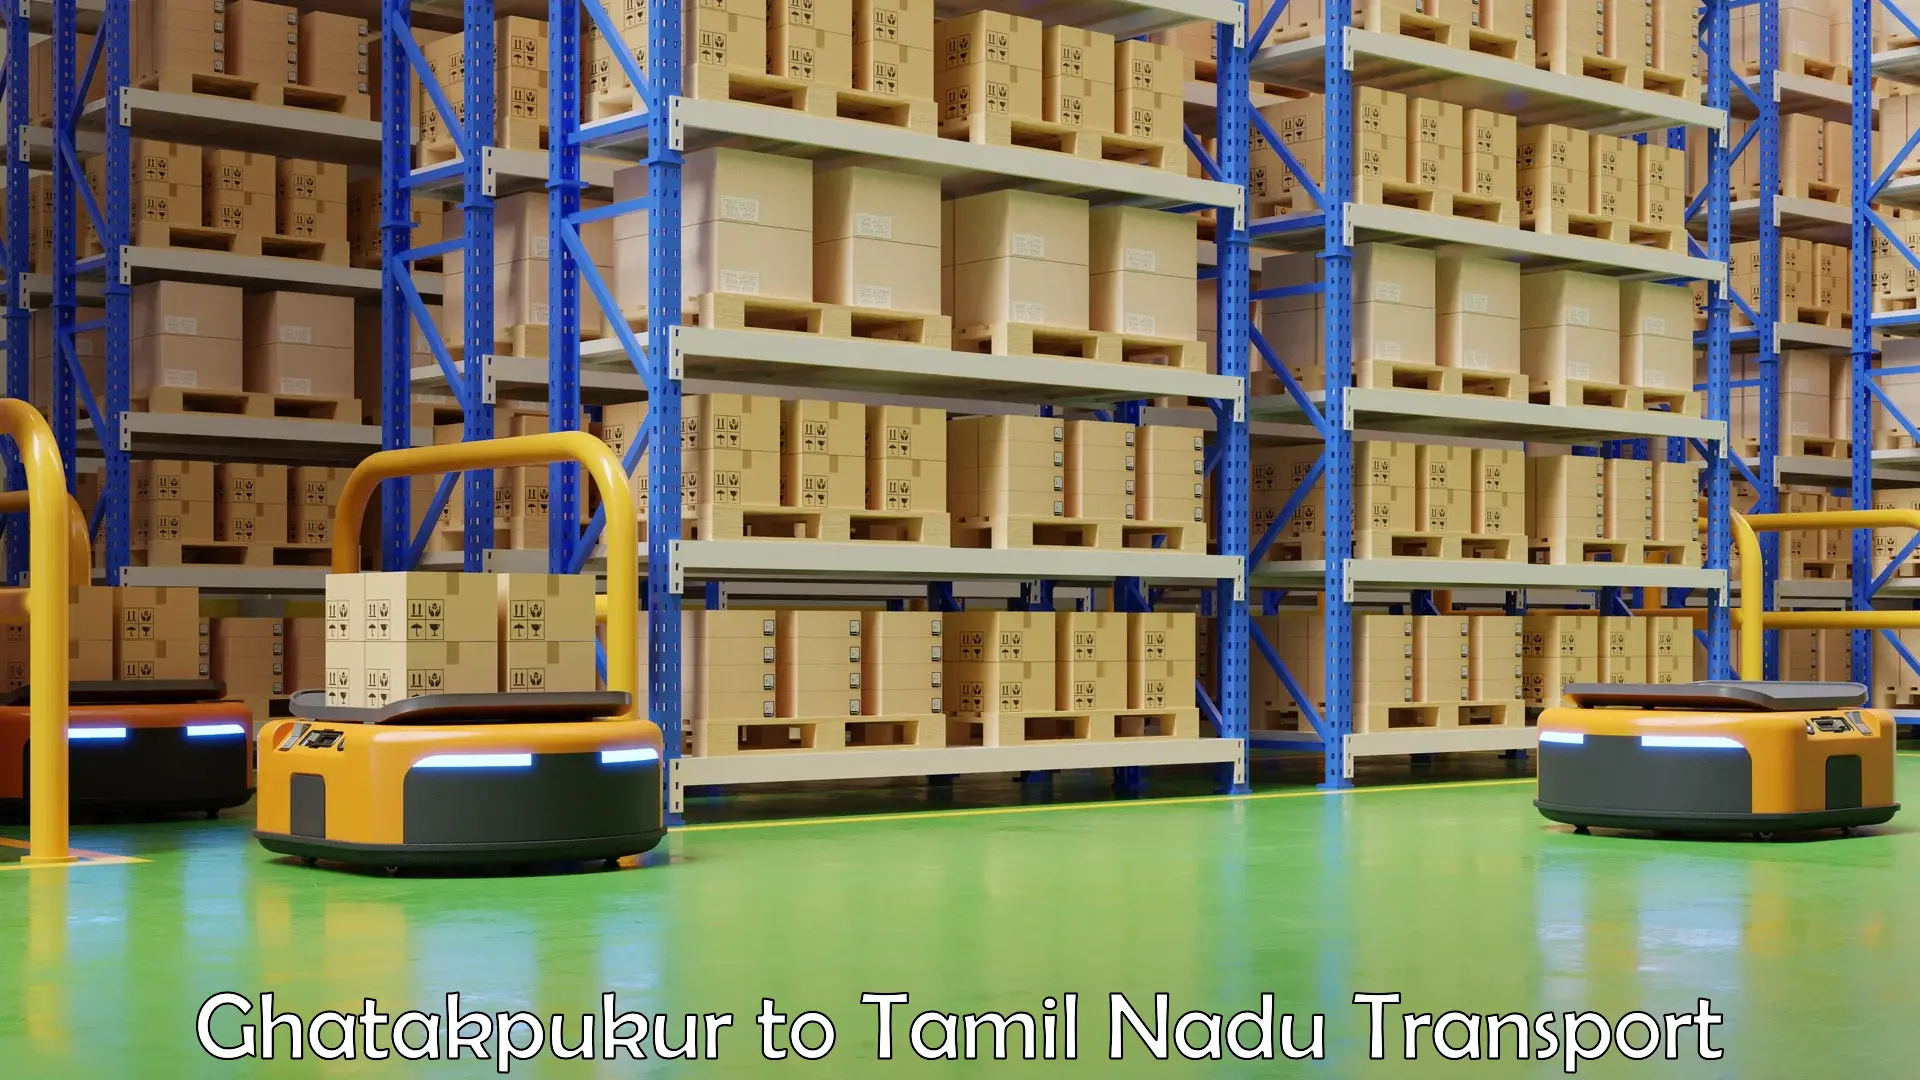 Goods transport services Ghatakpukur to Sri Ramachandra Institute of Higher Education and Research Chennai